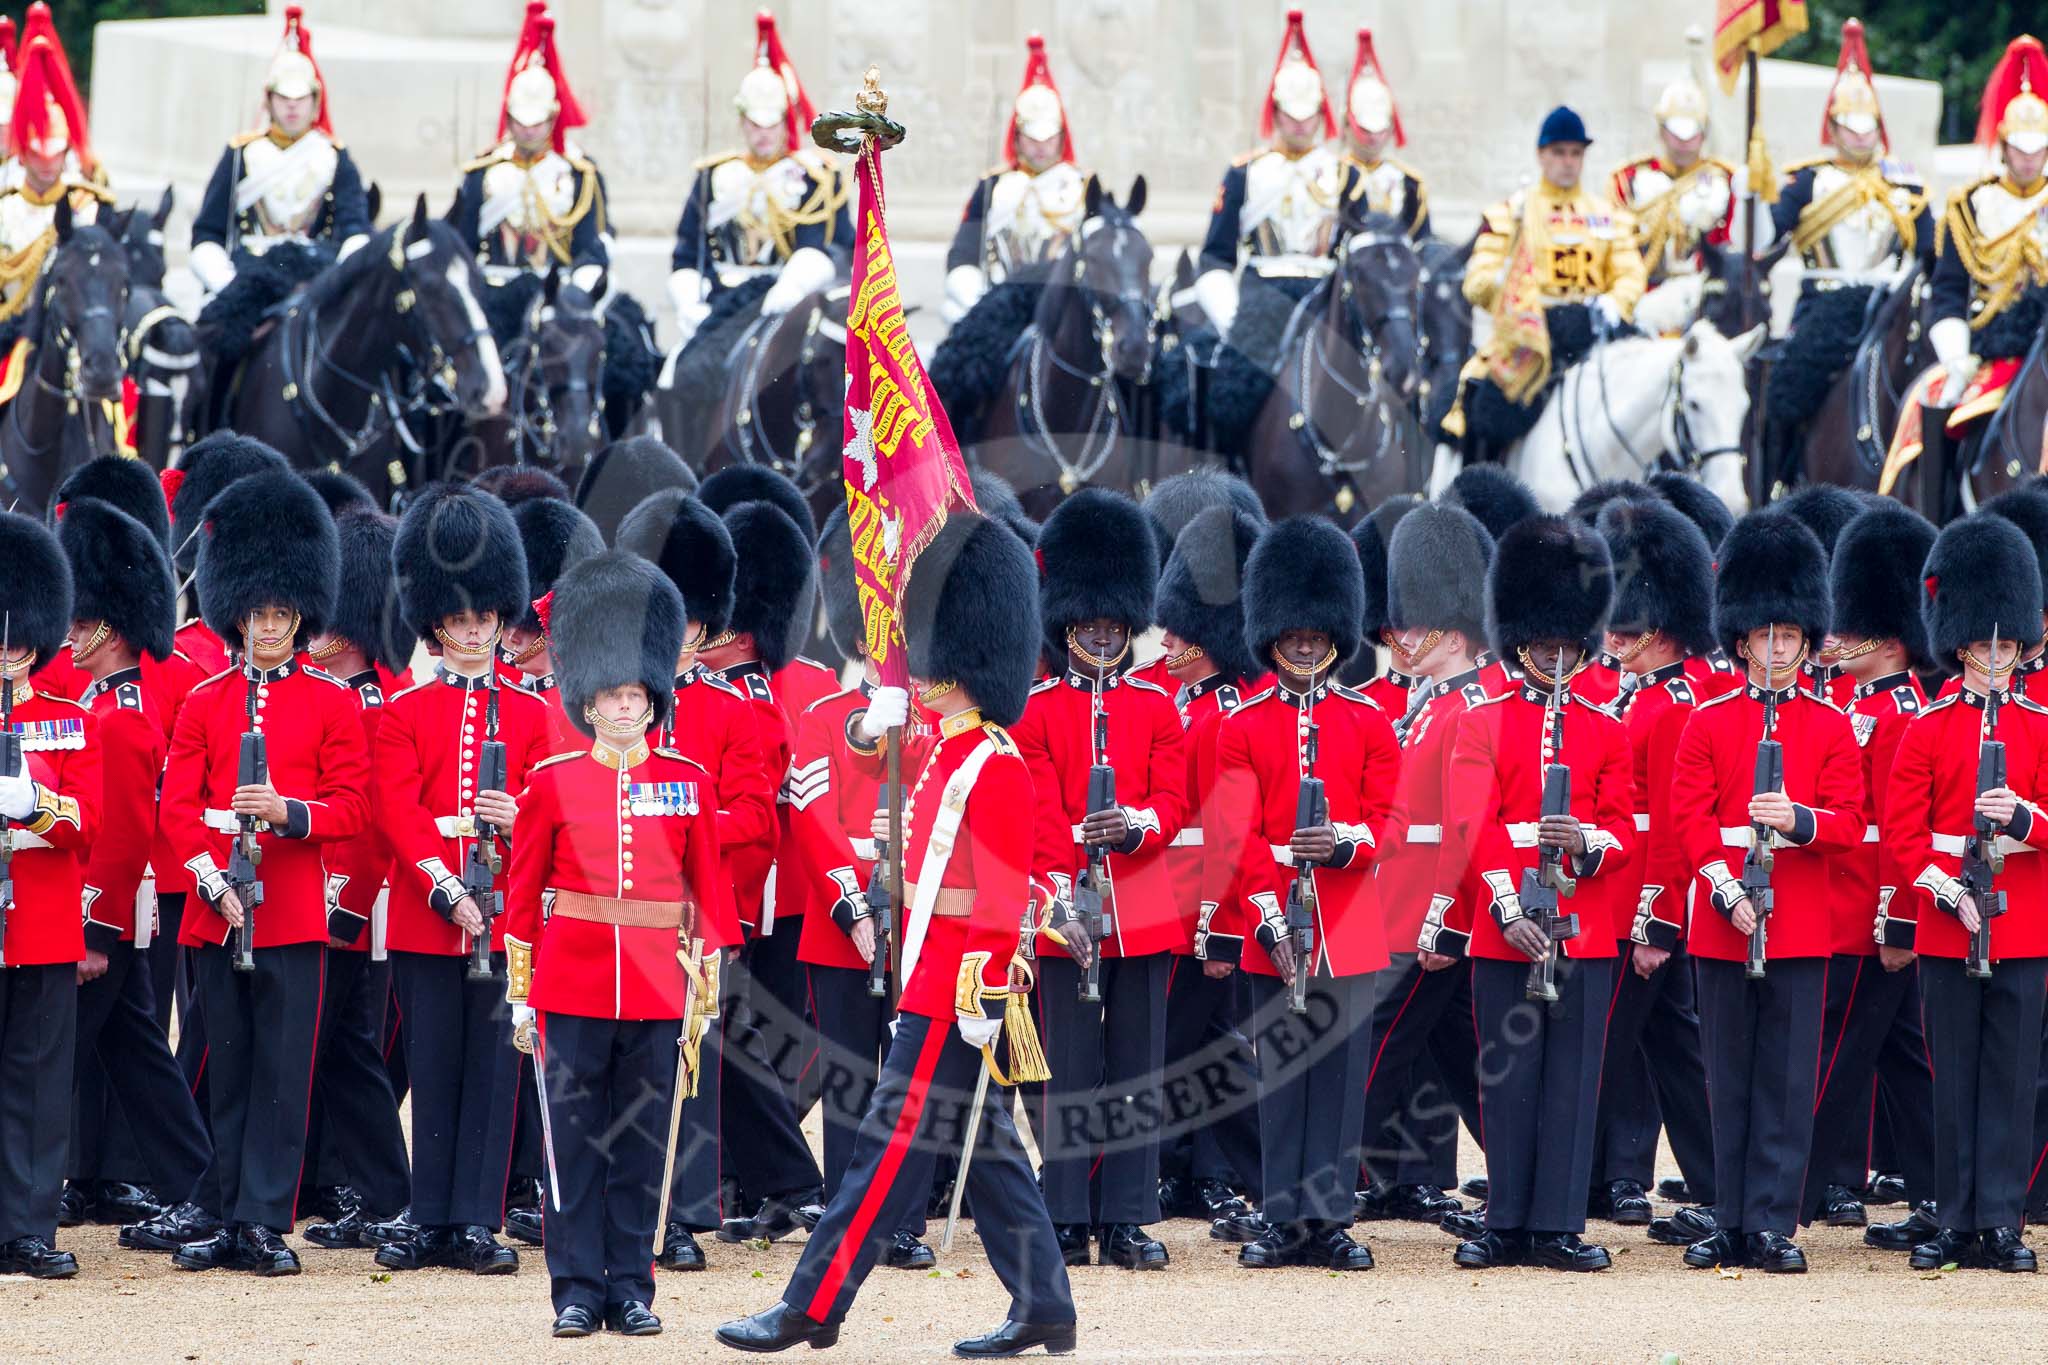 Trooping the Colour 2012: The Ensign, Second Lieutenant Hugo C Codrington, is trooping the Colour along No. 3 Guard, No. 7 Company, Coldstream Guards, whilst the Escort to the Colour, No. 1 Guard, is marching between the two lines of guardsmen..
Horse Guards Parade, Westminster,
London SW1,

United Kingdom,
on 16 June 2012 at 11:27, image #355